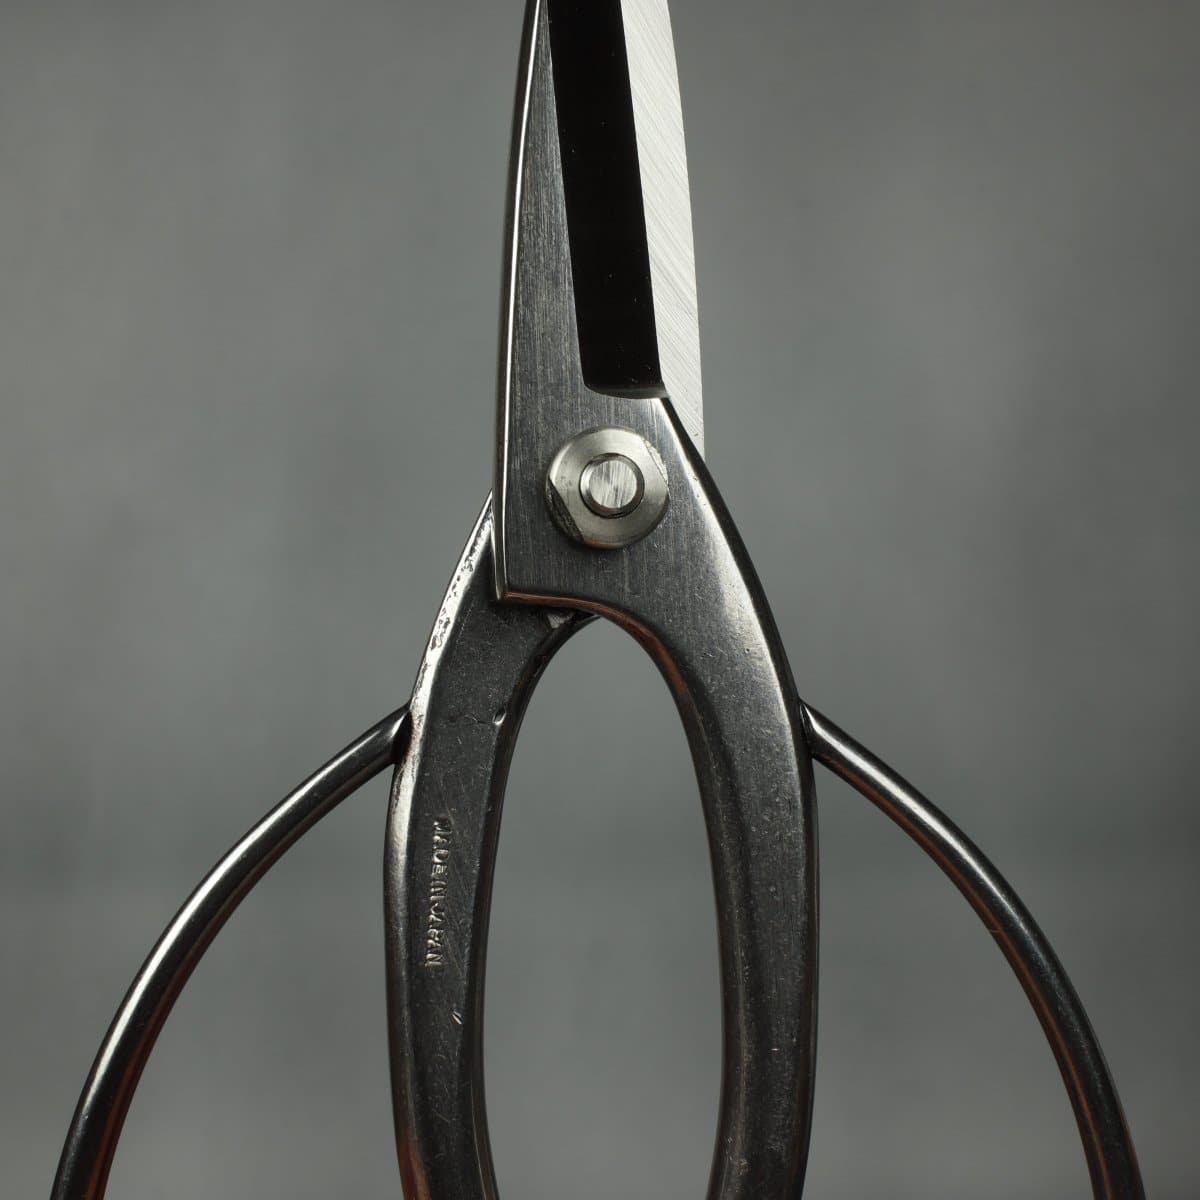 180mm Stainless Steel Bonsai Root Scissors made in japan